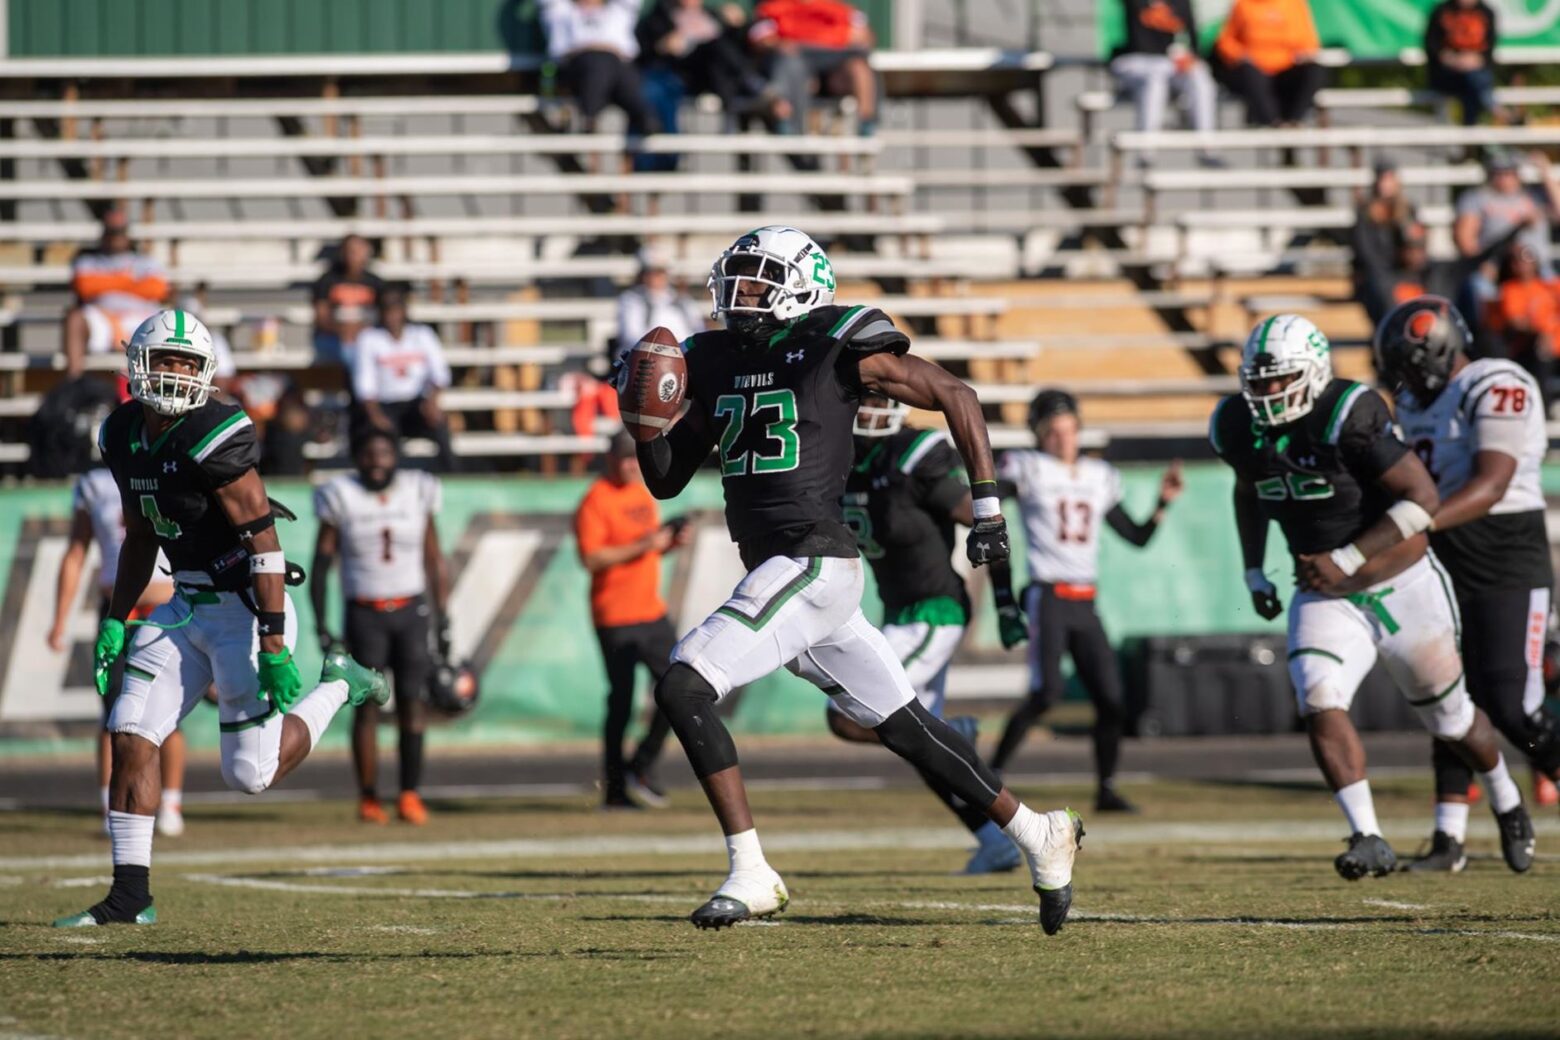 Weevils fall to ECU on Senior Day